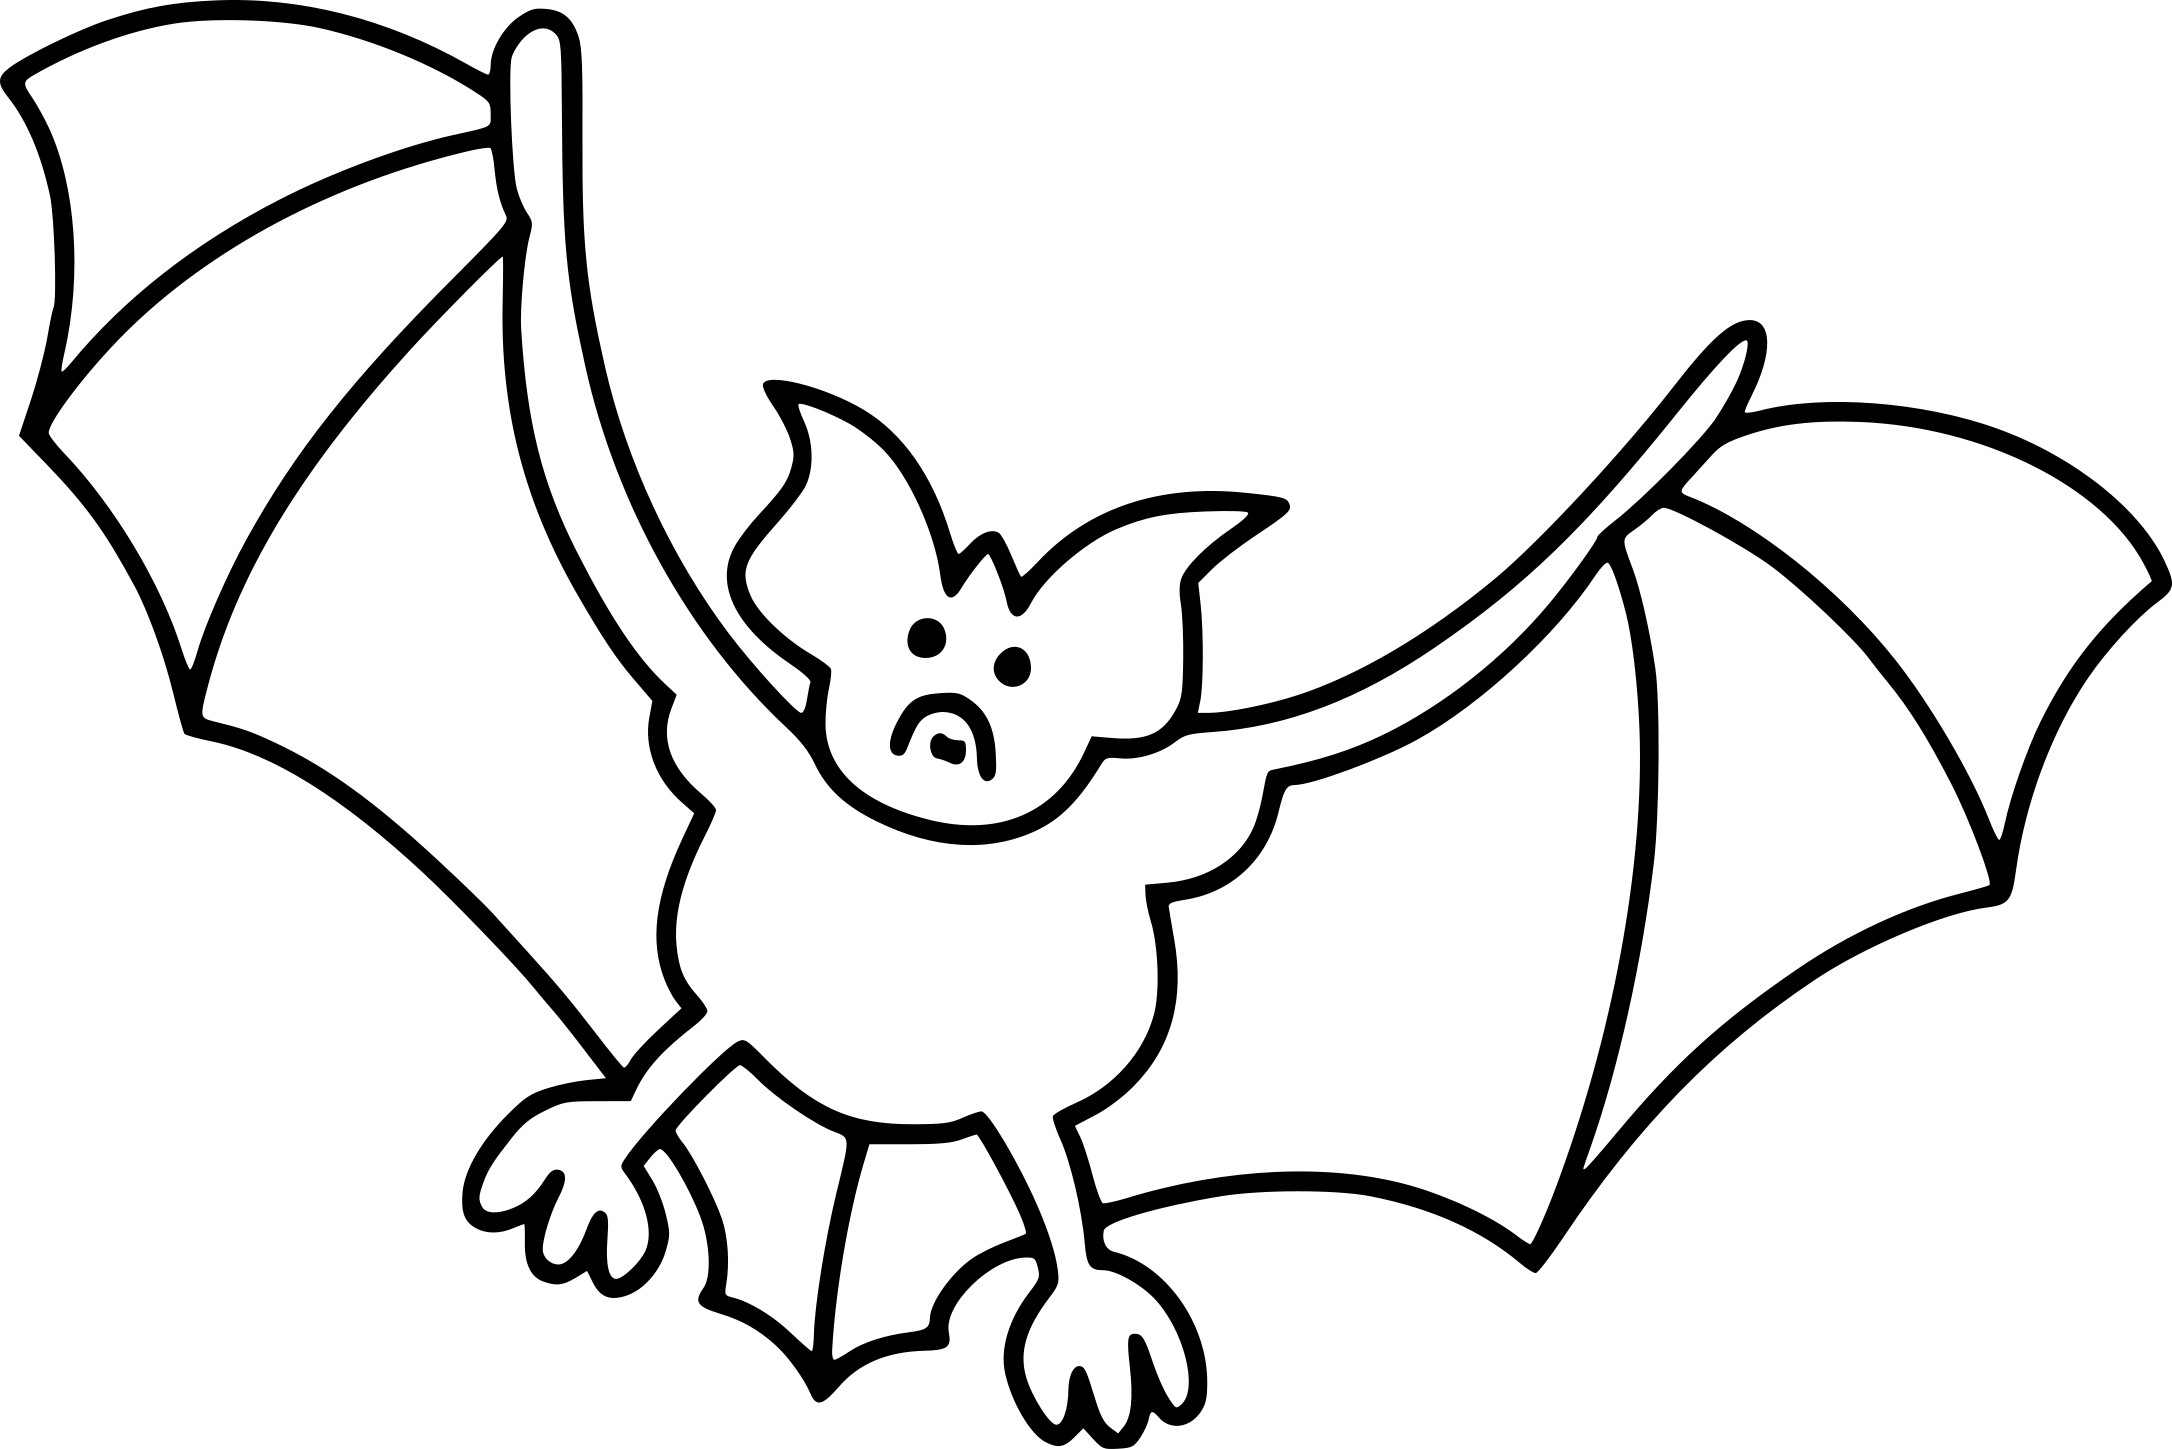 Halloween Bat drawing and coloring page